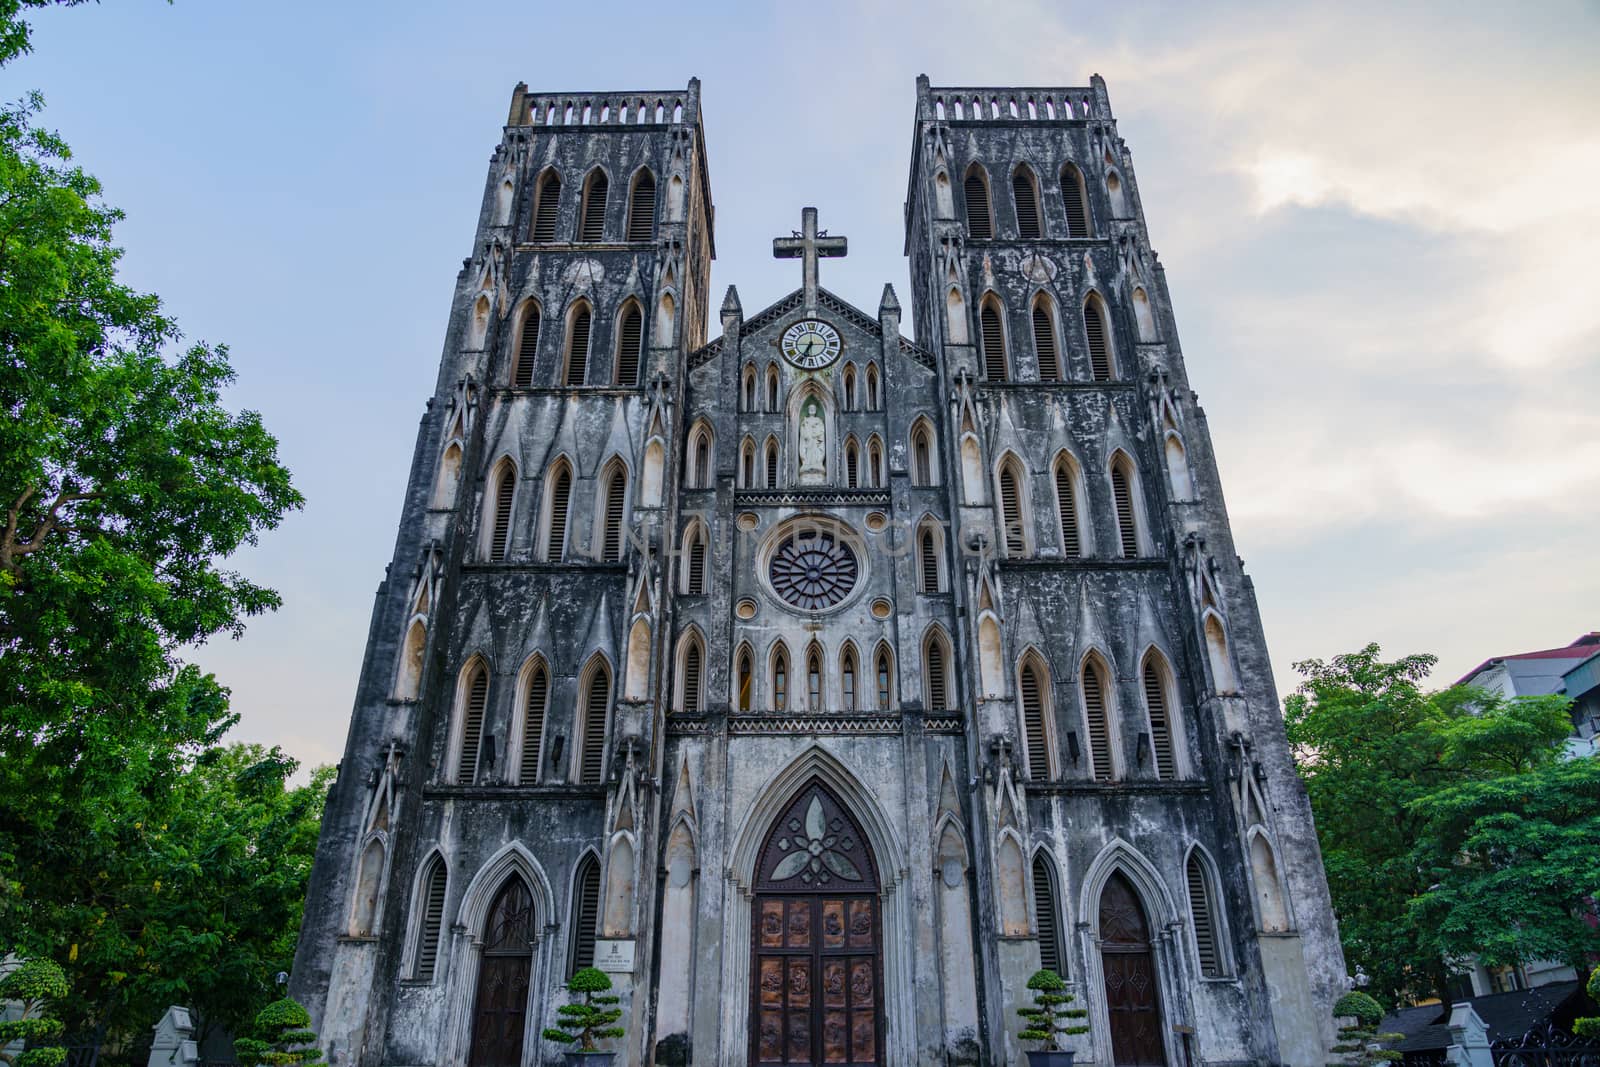 St Joseph's Cathedral is a old church in Vietnam. Its a late 19th-century Gothic Revival Neo-Gothic style church that serves as the cathedral of the Roman Catholic Archdiocese in OLD QUARTER CITY.